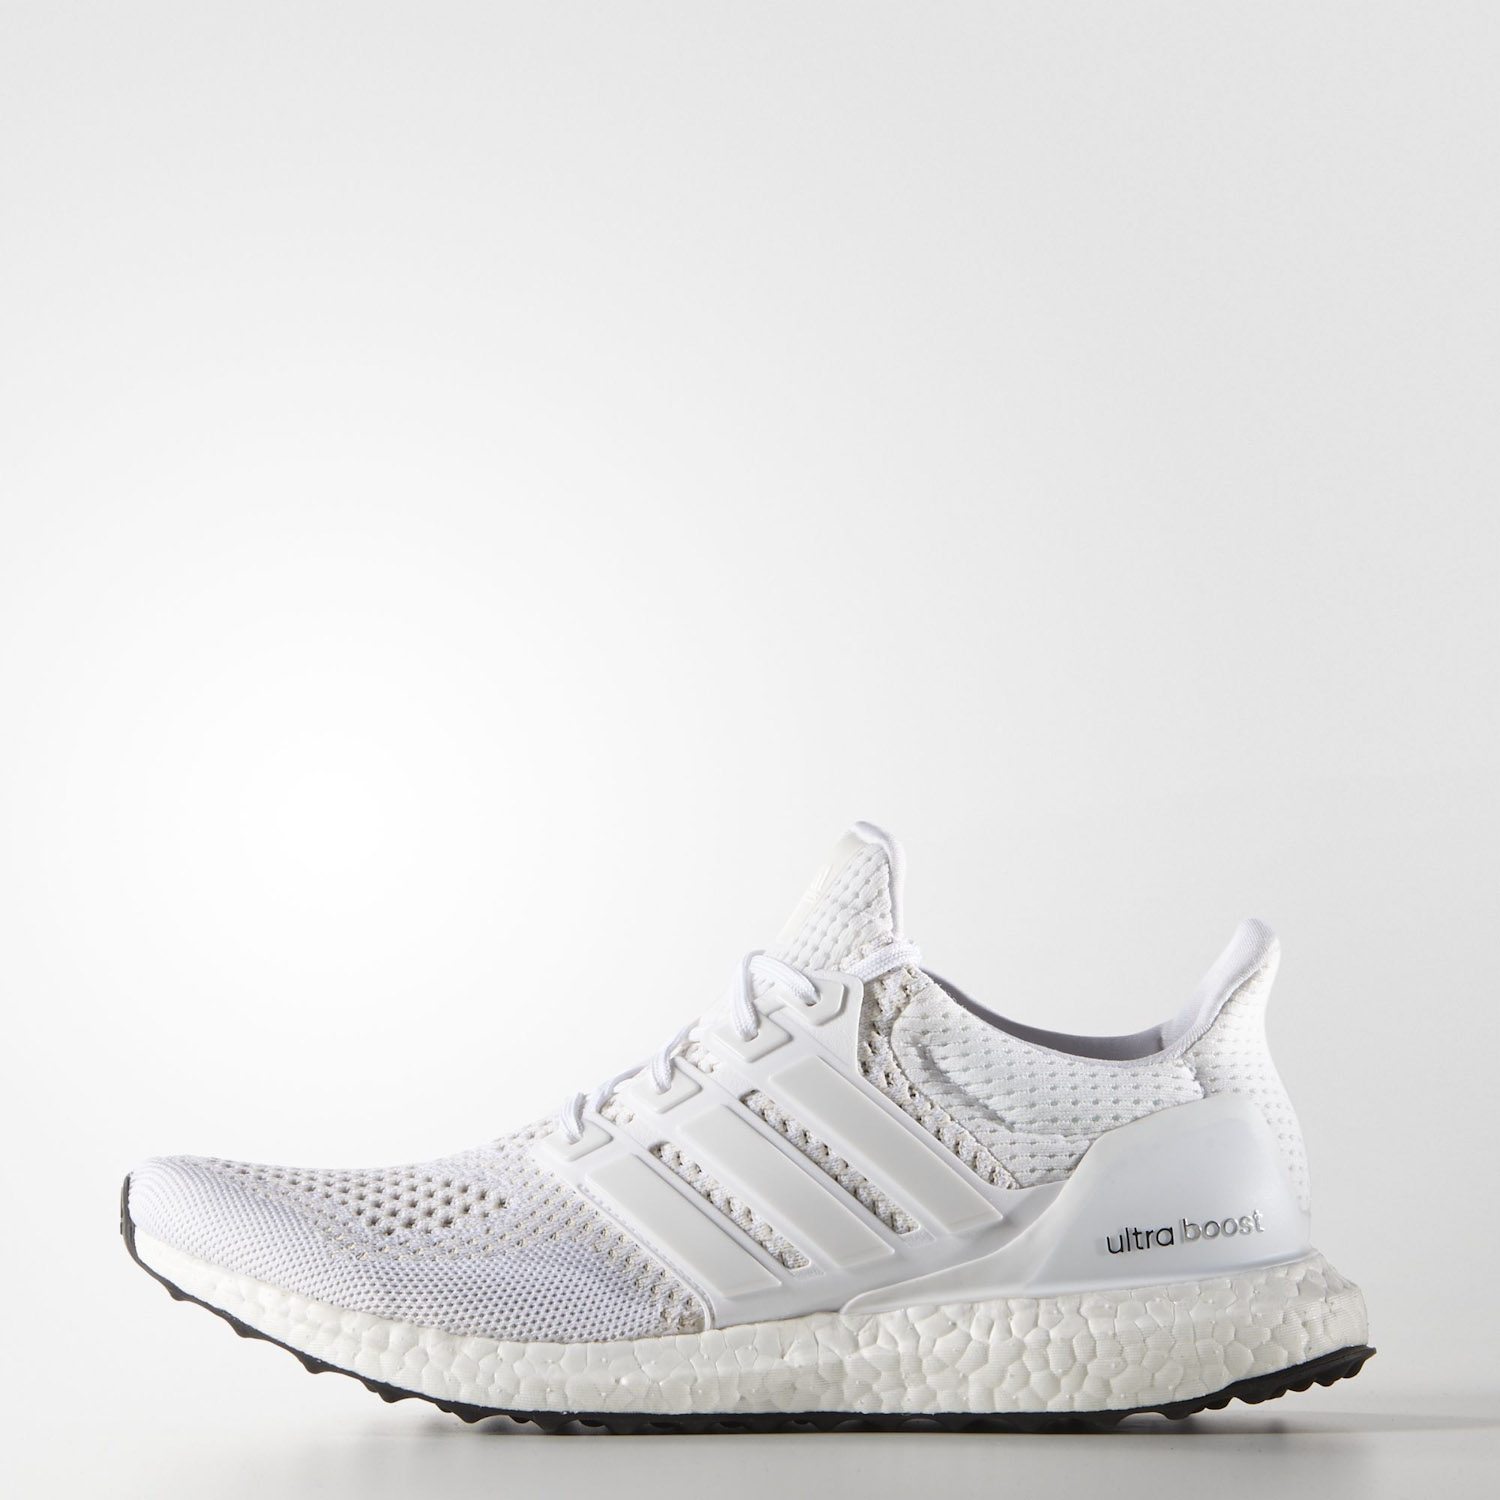 adidas Ultra BOOST All White 11